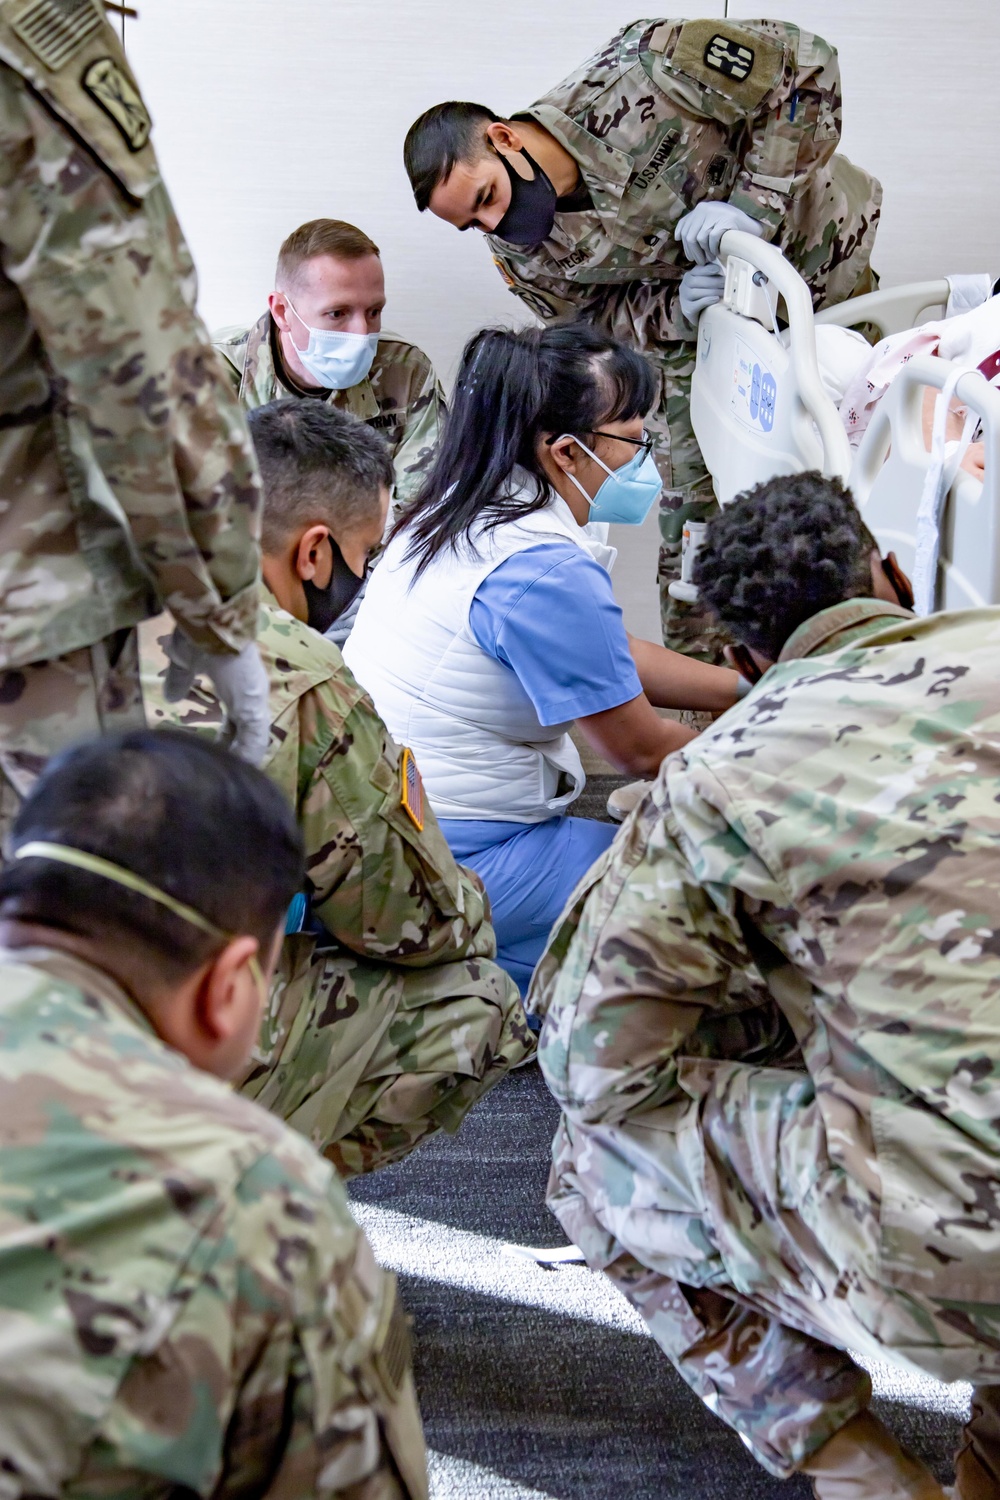 DVIDS - Images - Additional military medical personnel onboard to